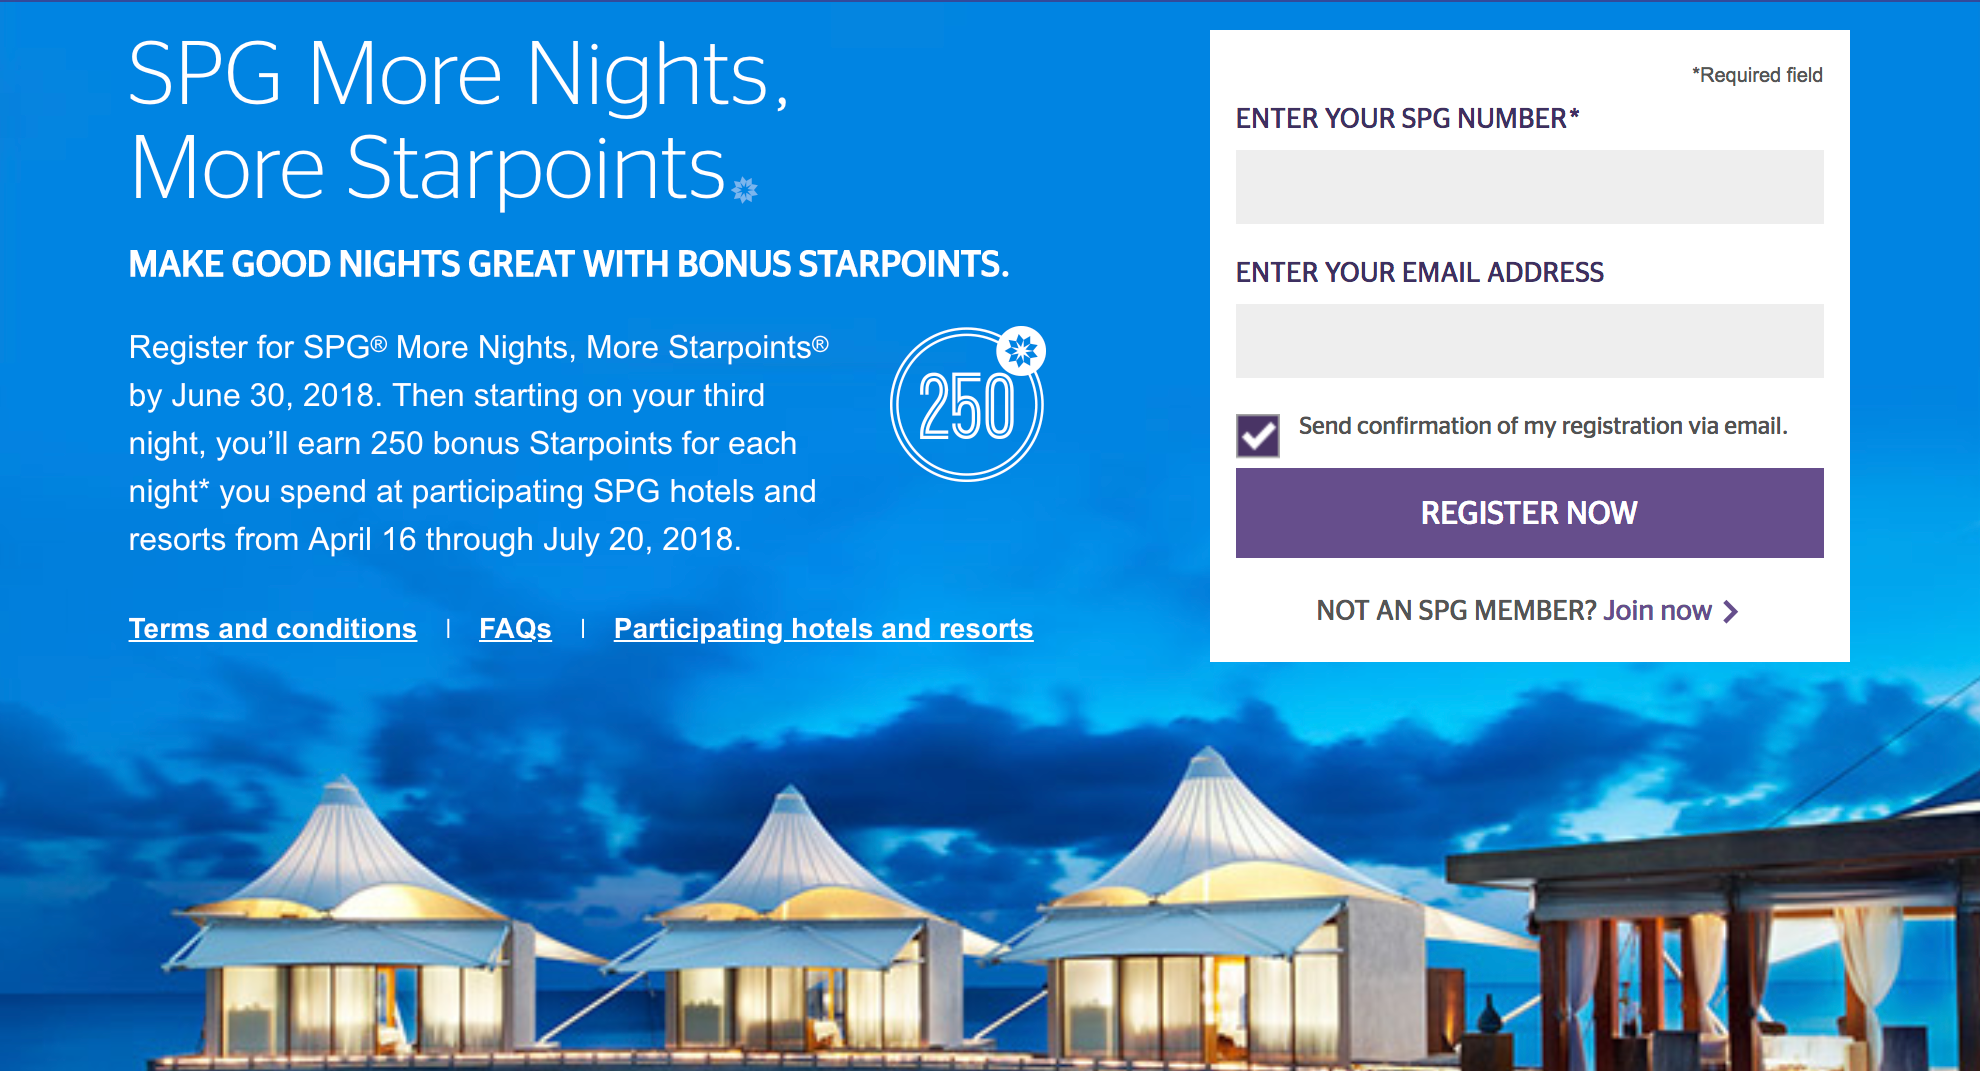 SPG More Nights, More Starpoints from April 16 - July 20